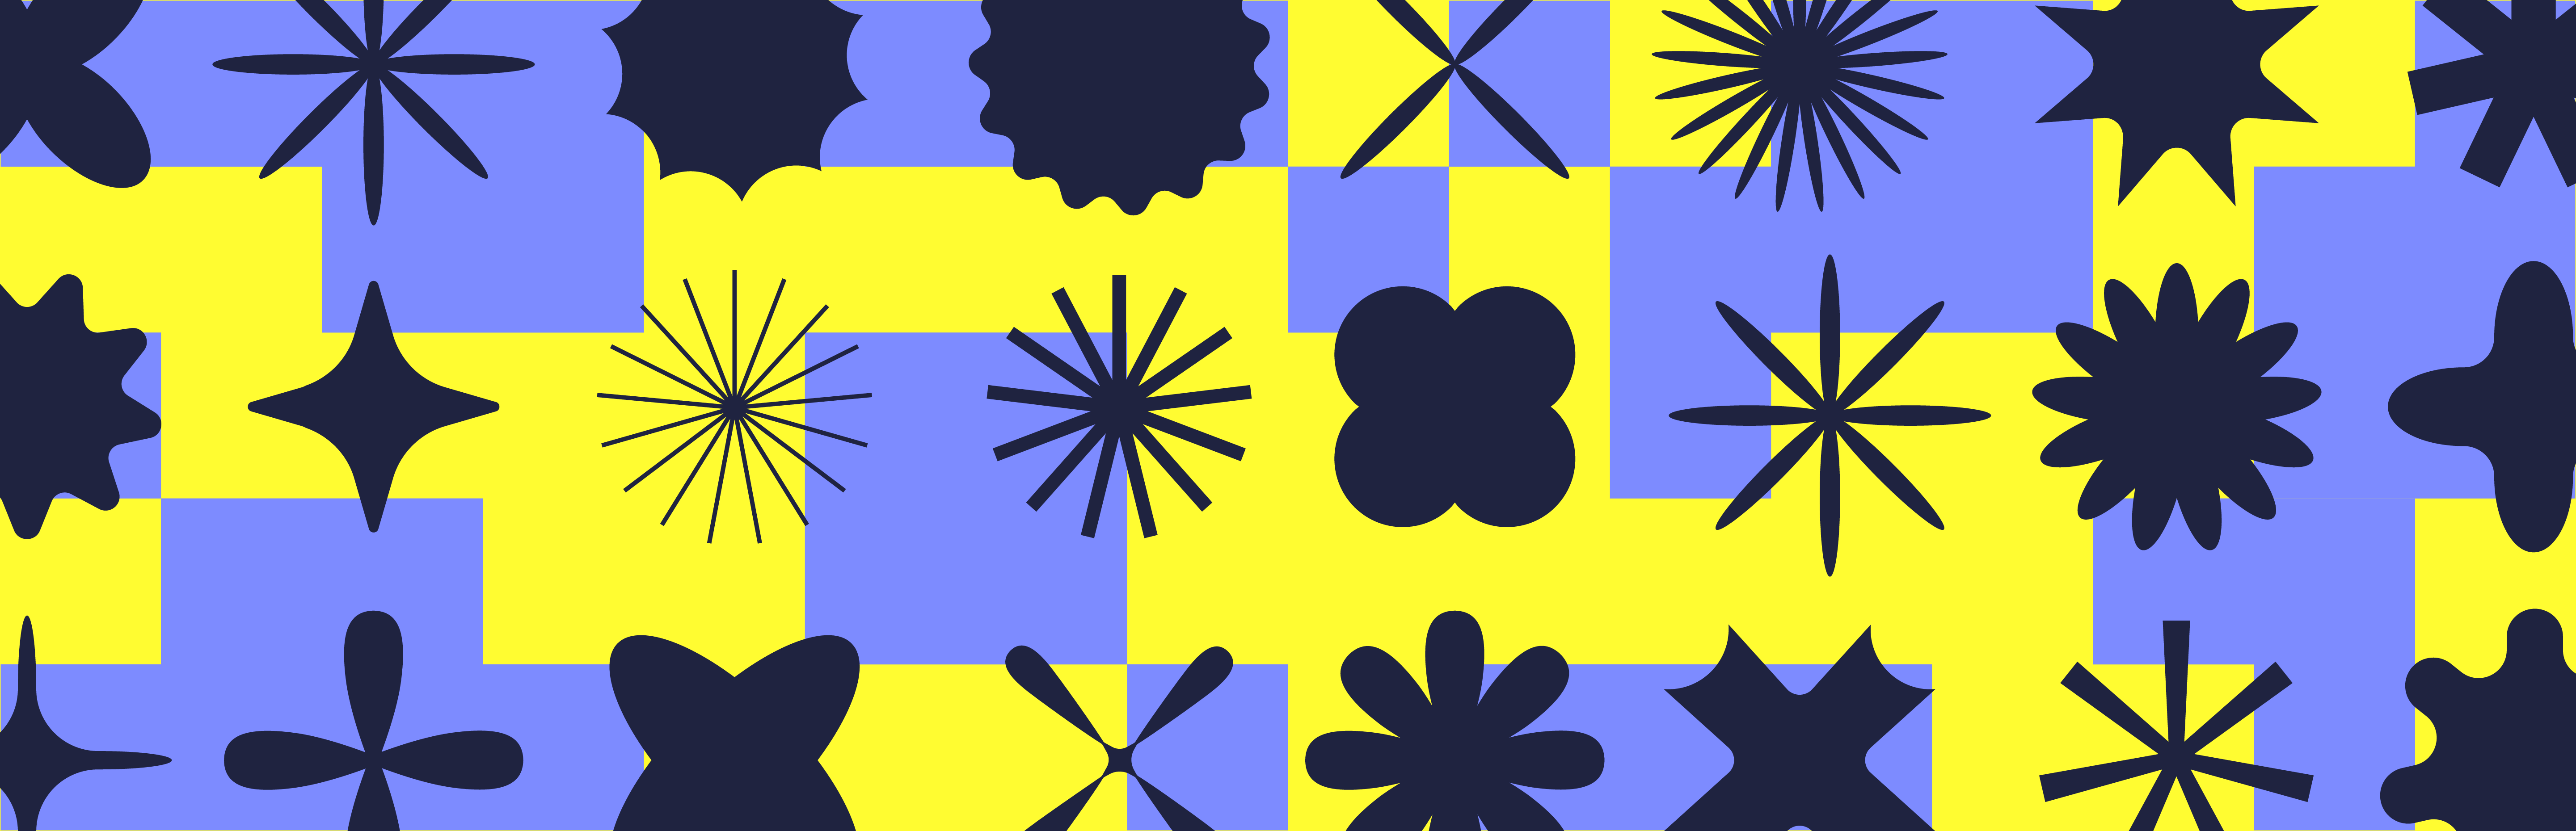 a blue and yellow checkered background with black shapes